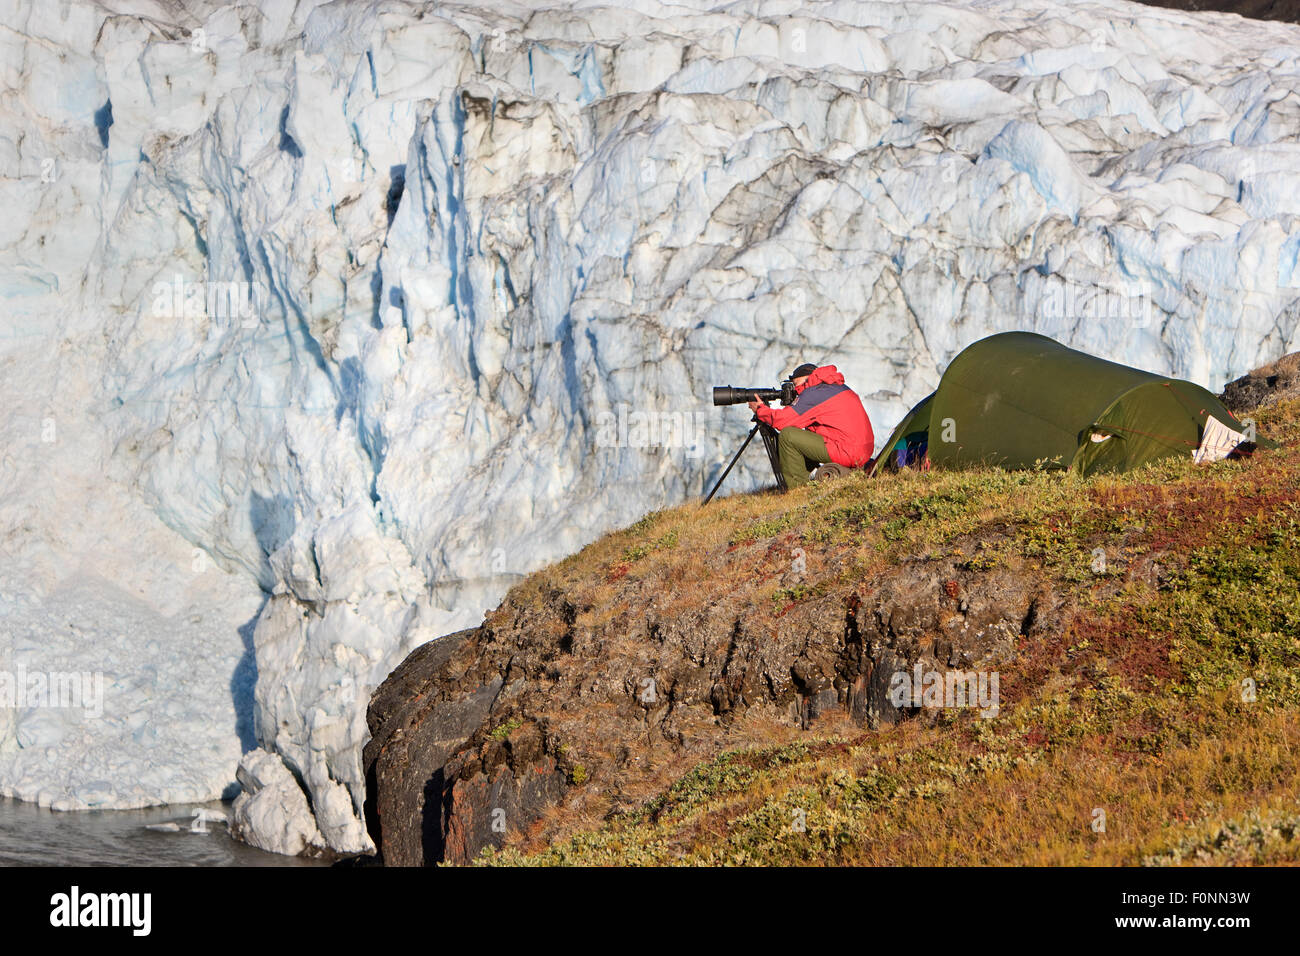 Photographer, Kai Jensen, sitting outside tent photographing, by the Russells glacier, Greenland, August 2009 Stock Photo